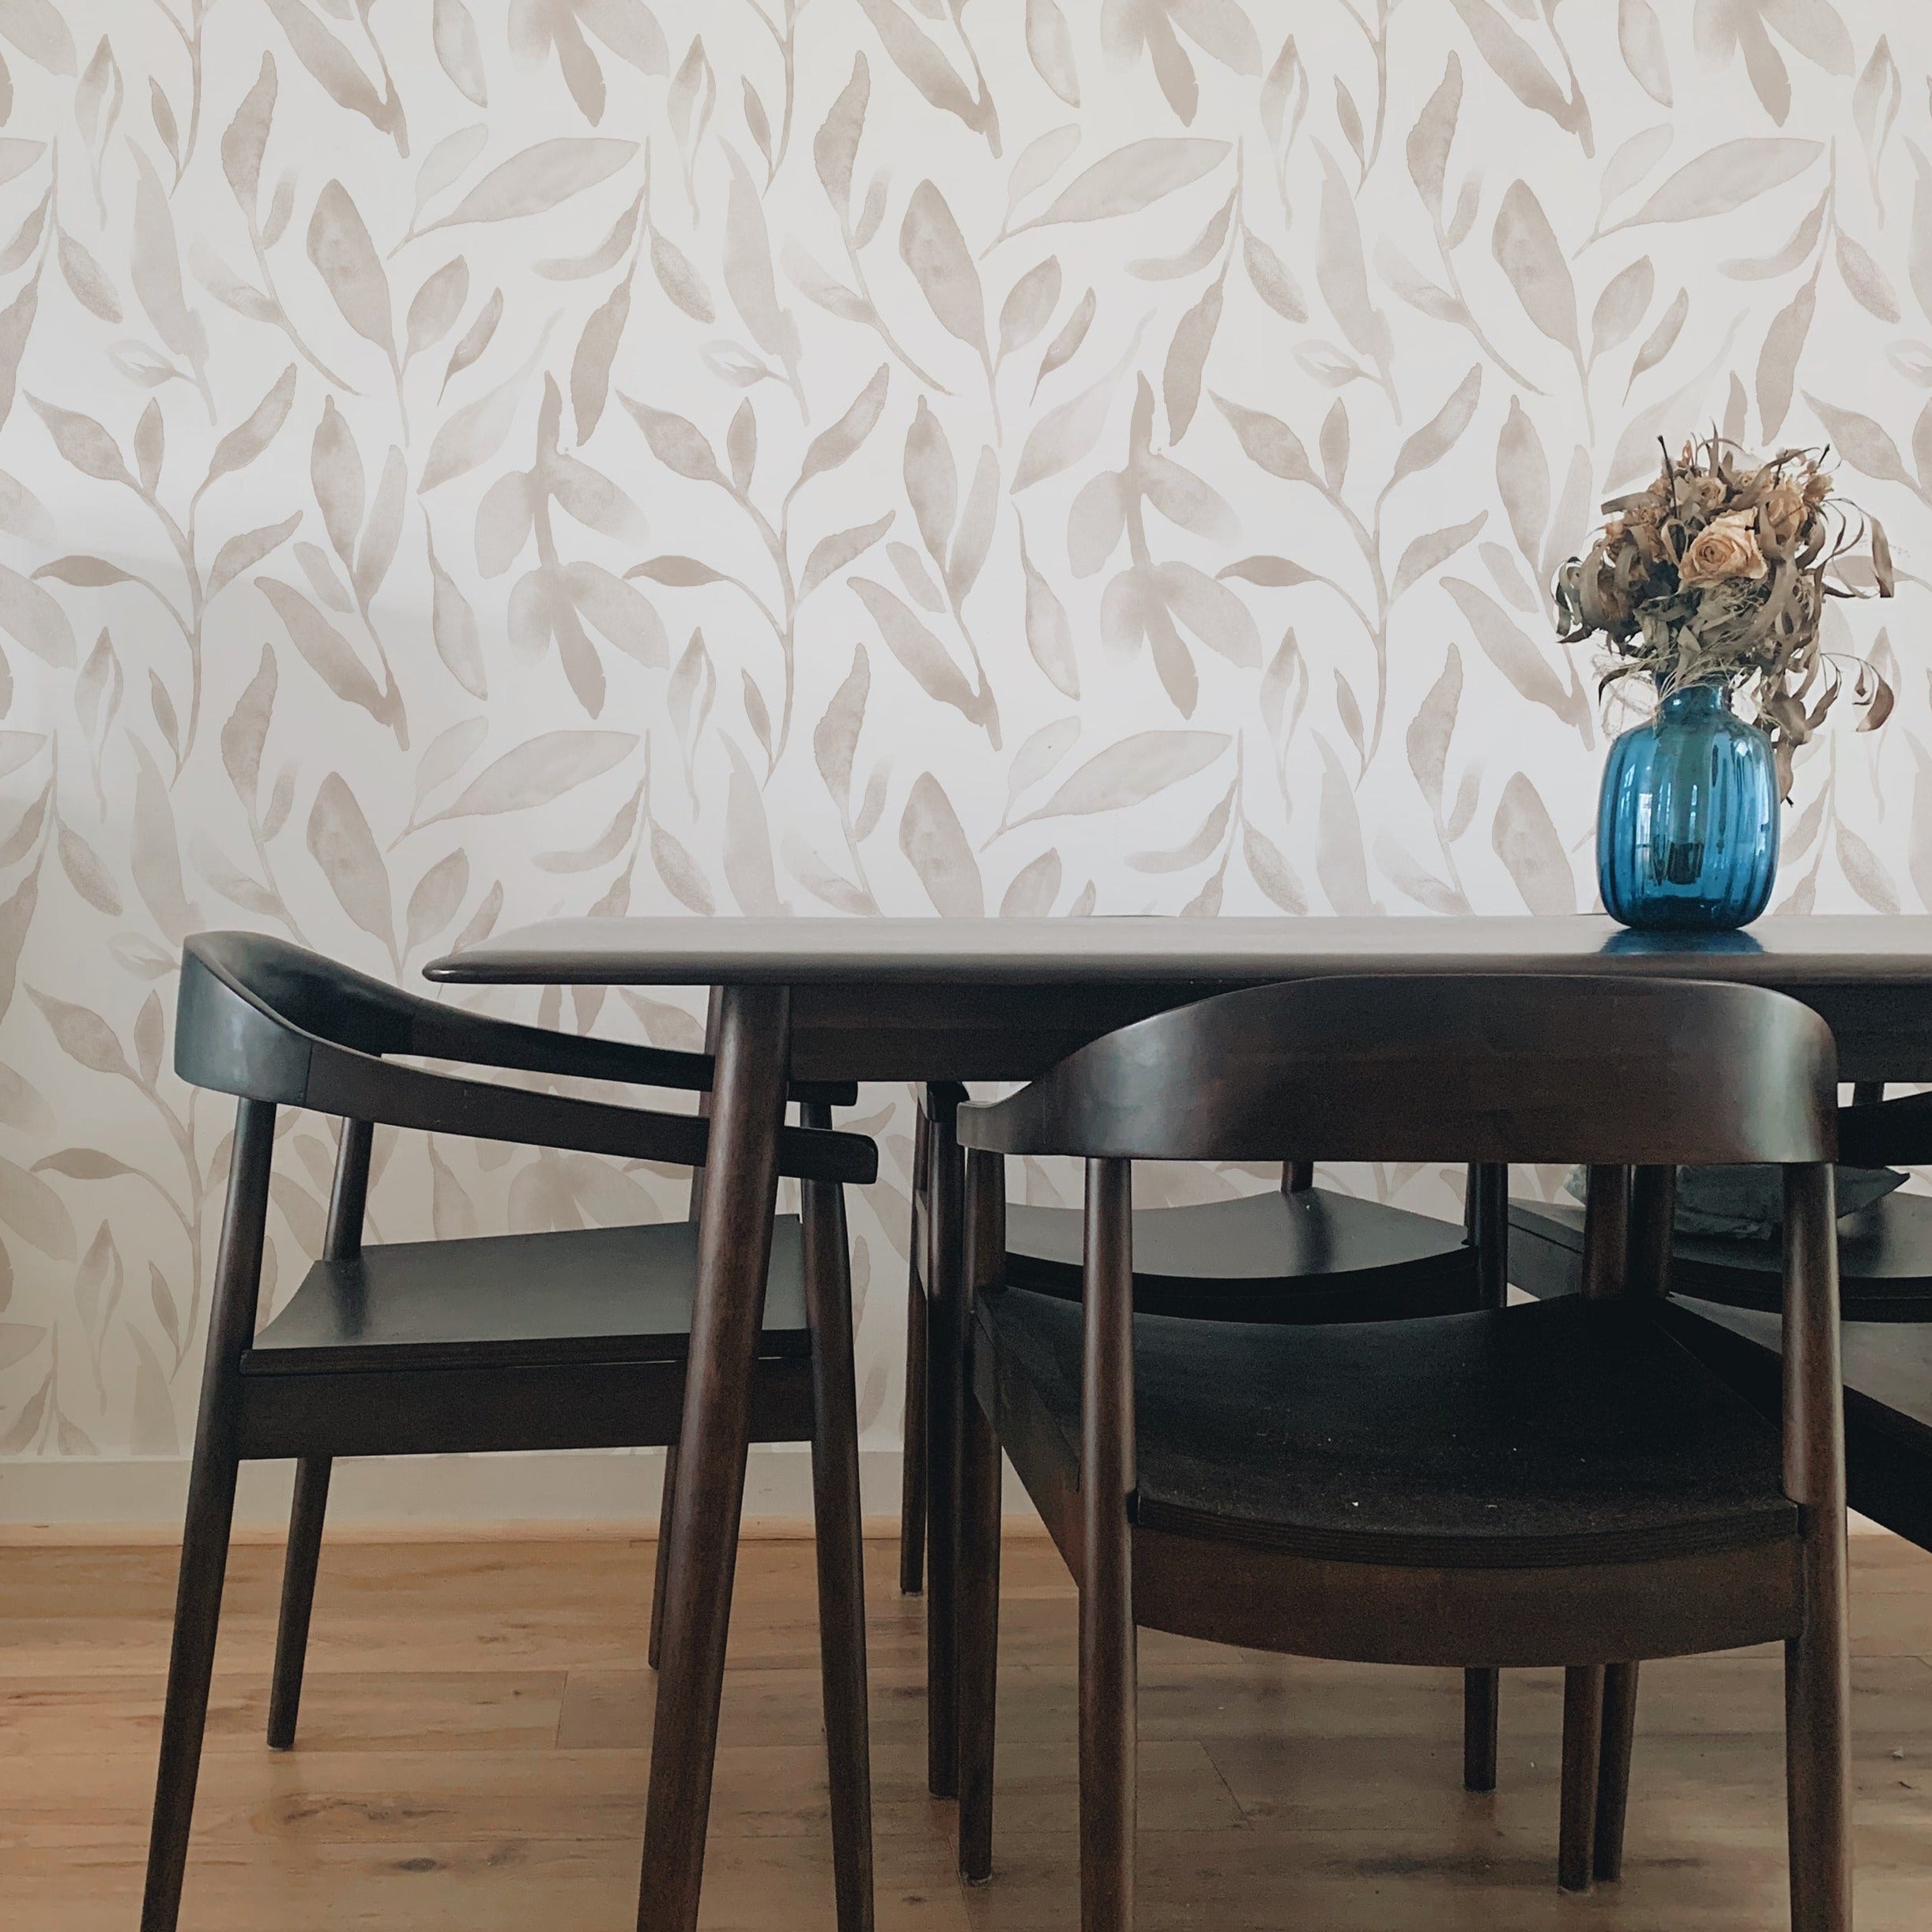 Contemporary dining area with Delicate Watercolour Leaves Wallpaper enhancing the space with its subtle beige leaf designs on a white background. The room features a dark wooden table, complemented by vintage-style chairs and a vibrant blue vase, merging modern aesthetics with classic elements.